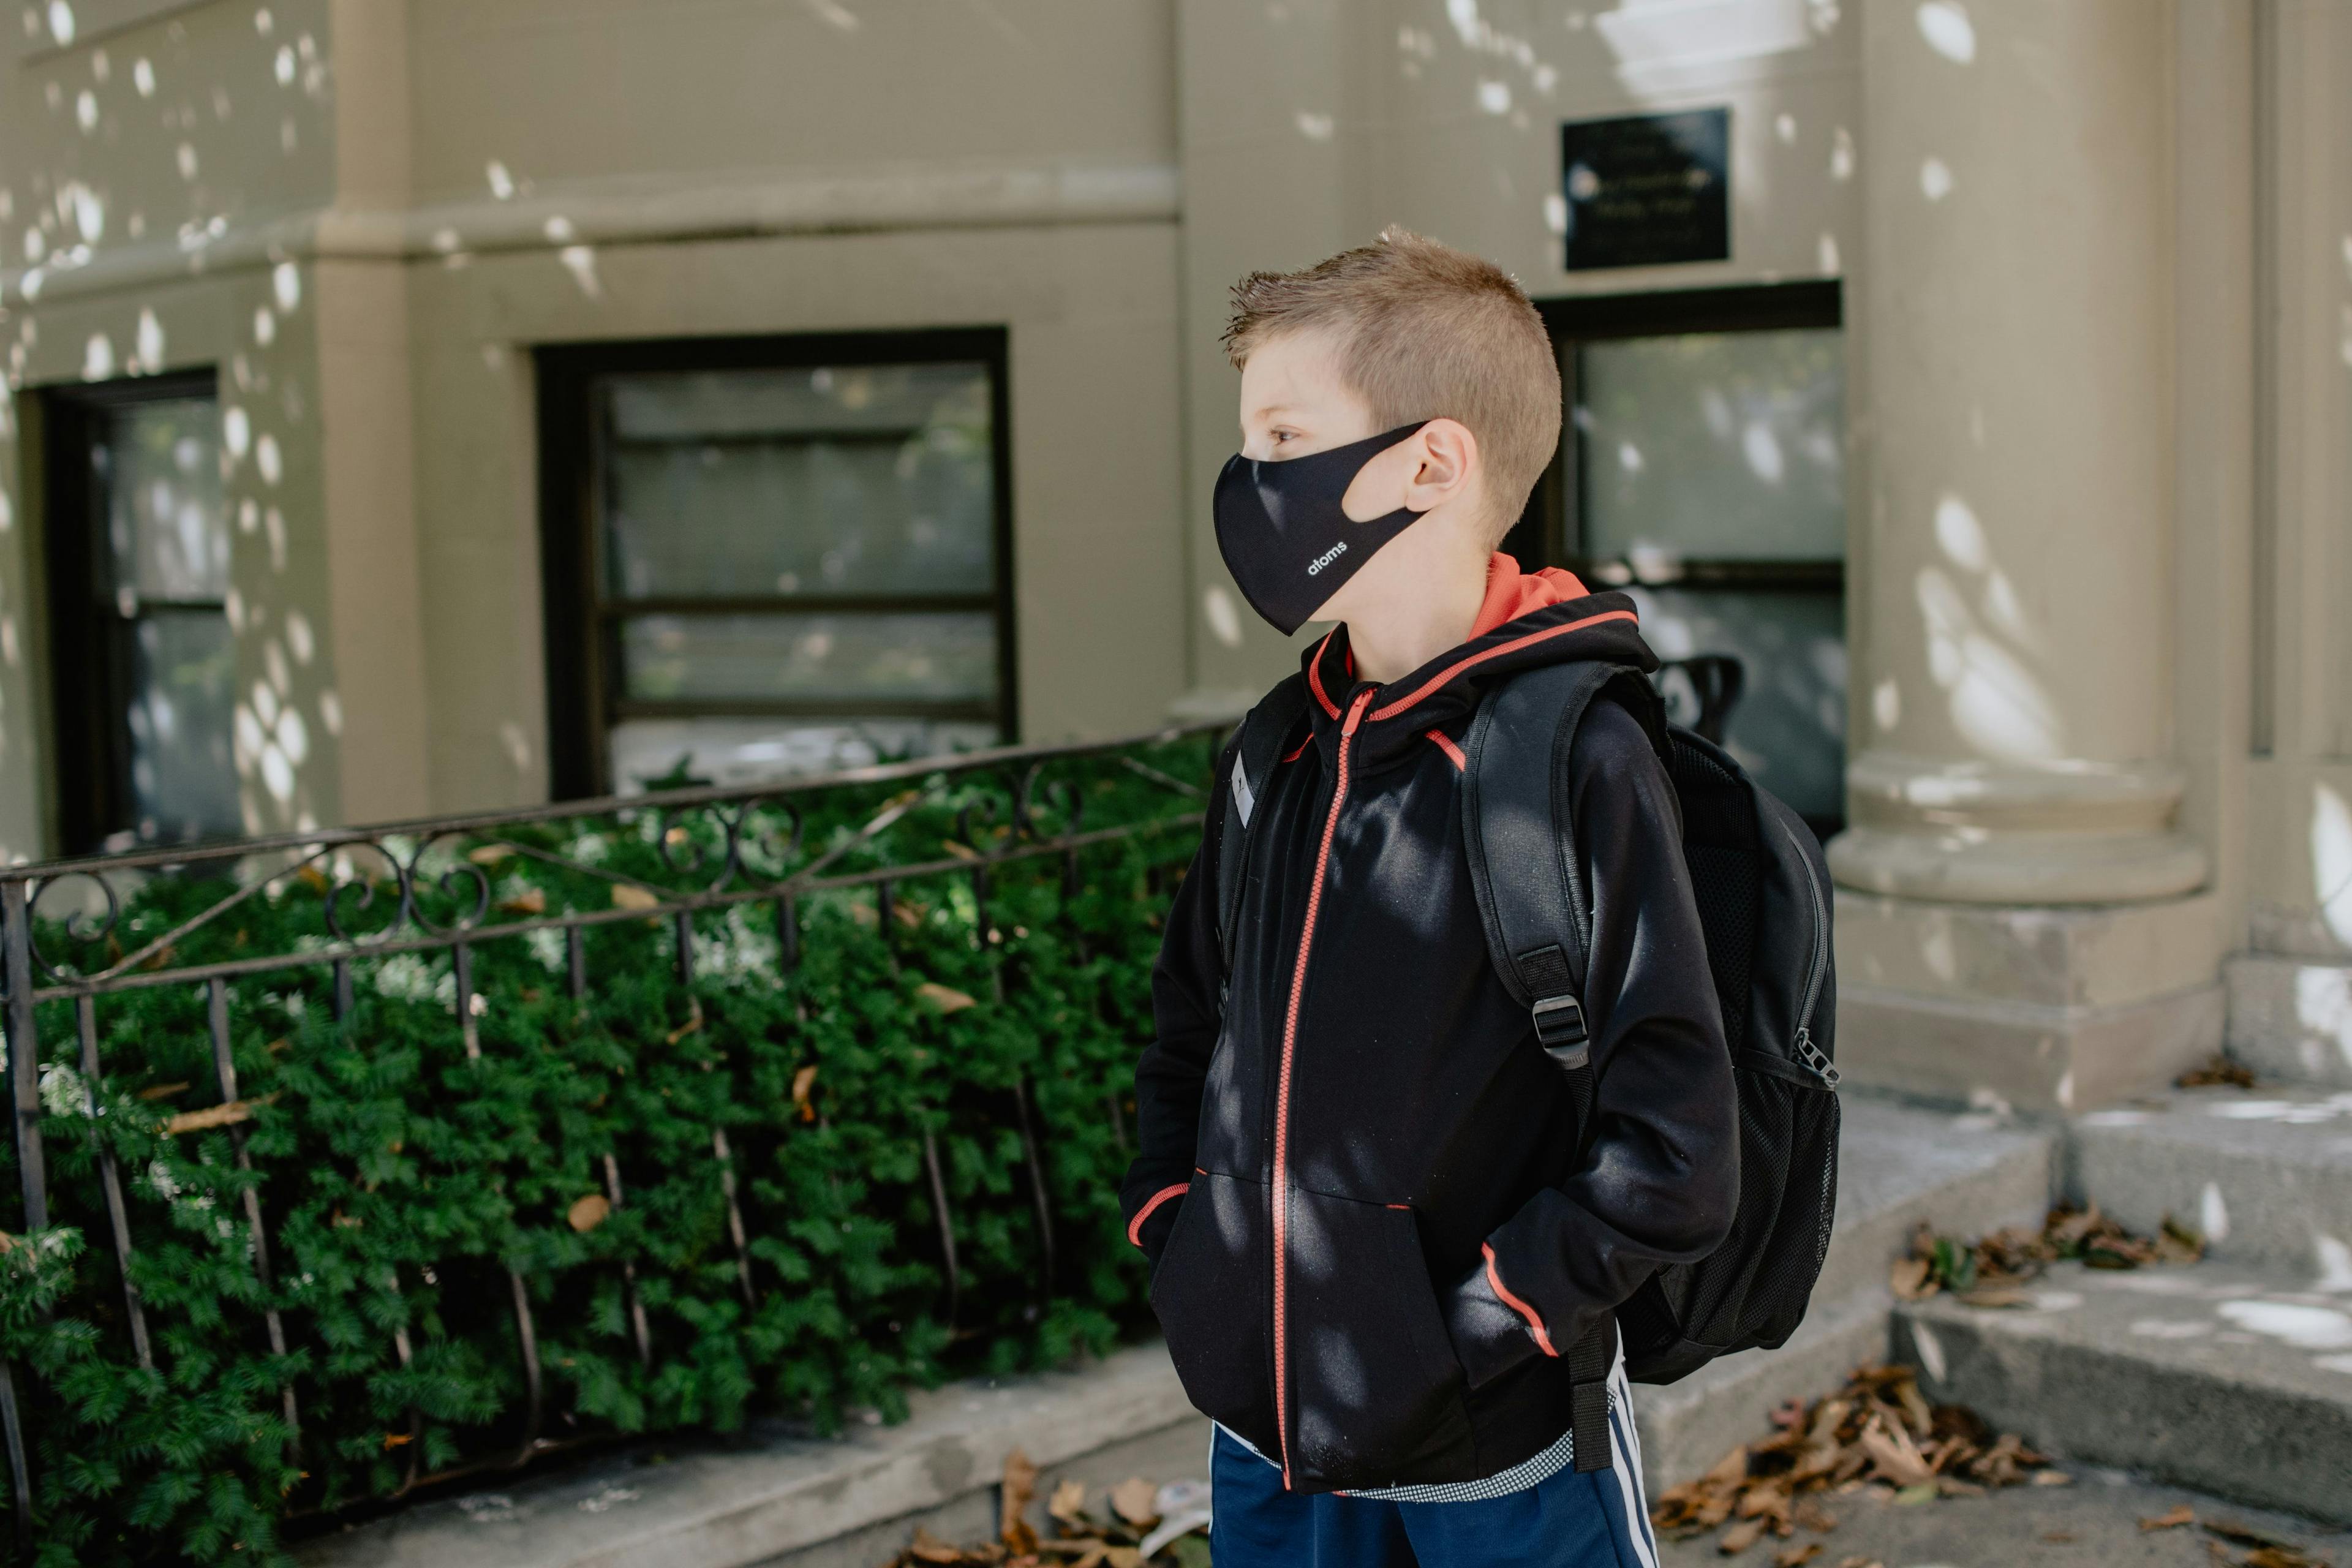 the benefits to children of wearing face masks to prevent COVID-19 outweigh potential infectious risks from face touching, according to a study analyzing hand-to-face contacts in a simulated school environment.